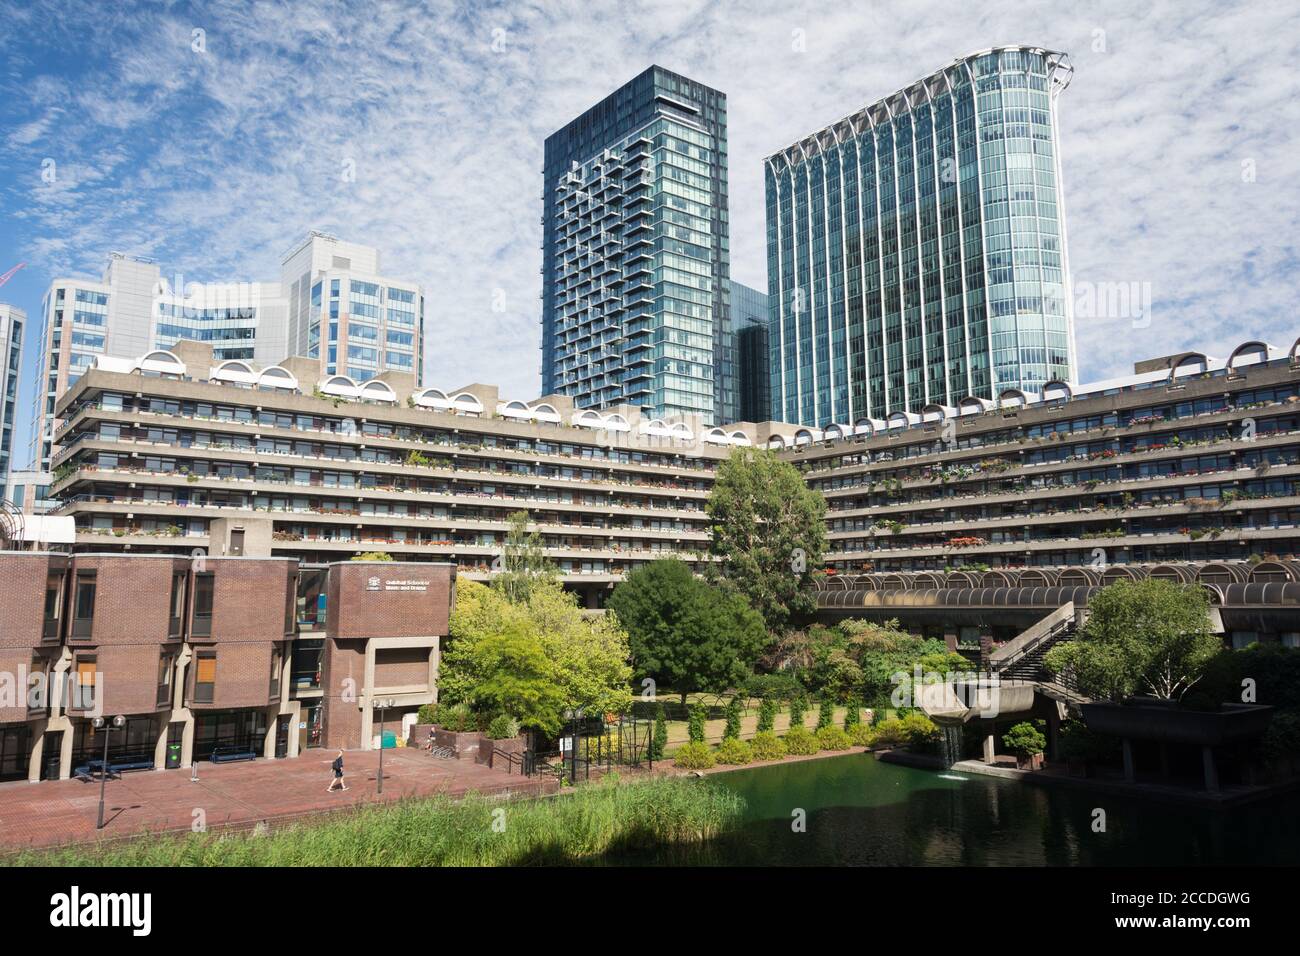 Guildhall School of Music & Drama on the Barbican Exhibition Centre and Estate, Silk Street, City of London, EC1, England, GROSSBRITANNIEN Stockfoto